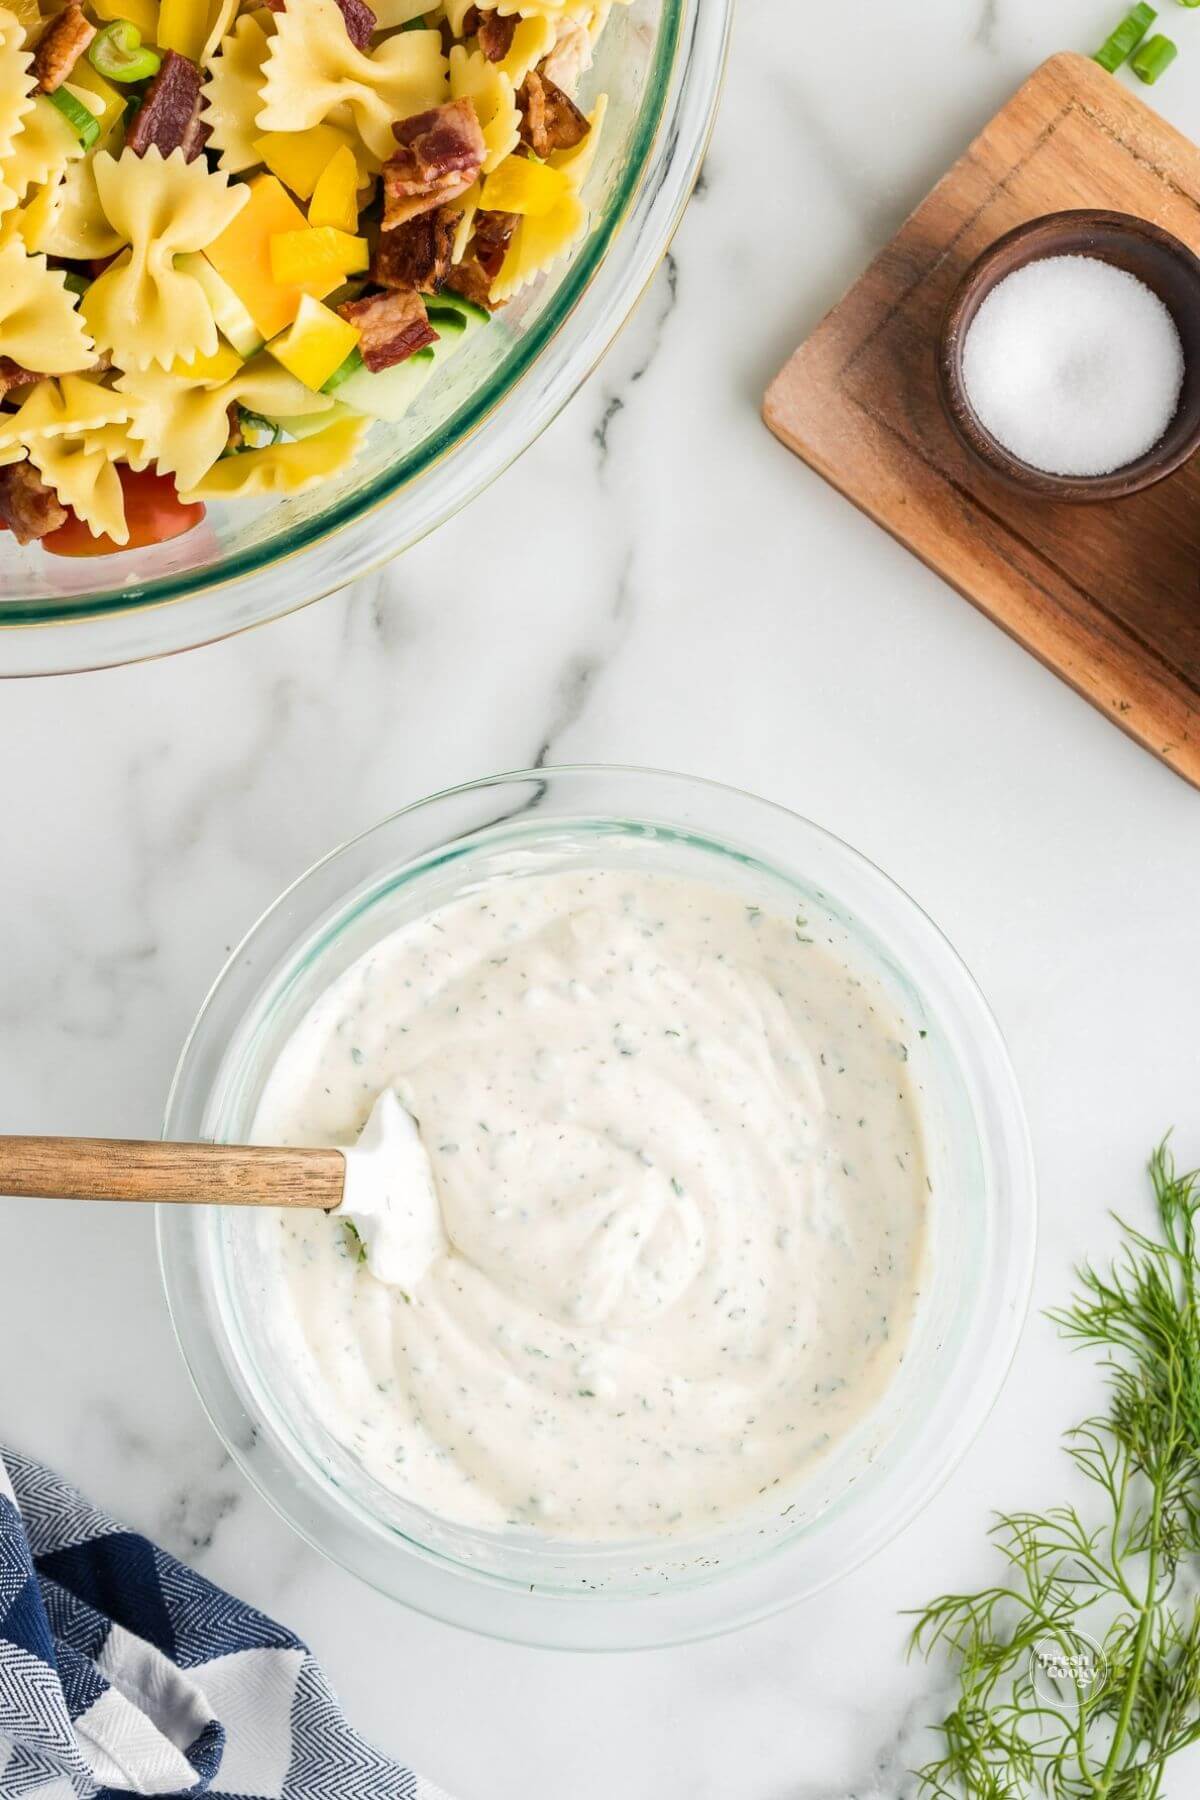 Combing ranch dressing ingredients in small bowl for chicken bacon pasta salad.